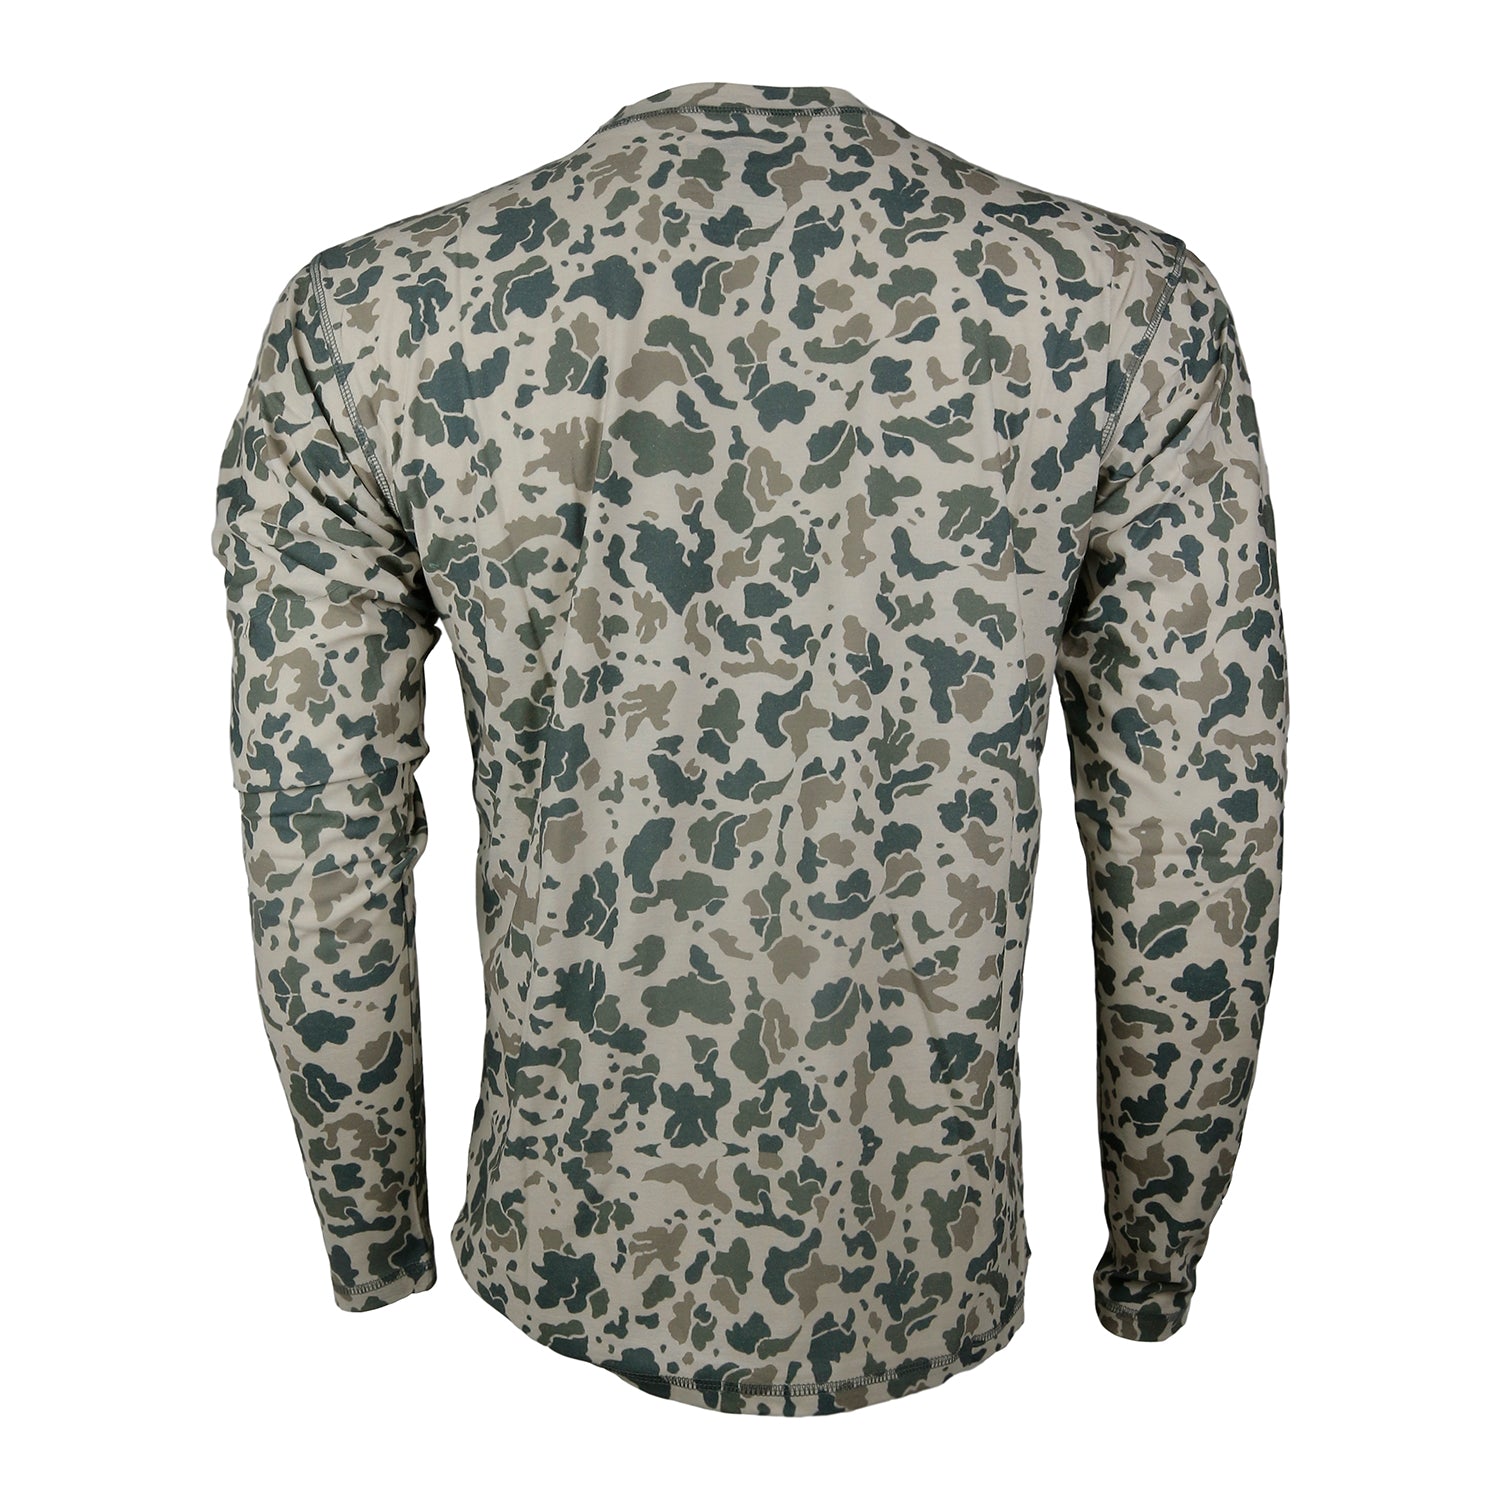 A camo printed long sleeved sun shirt from the back.